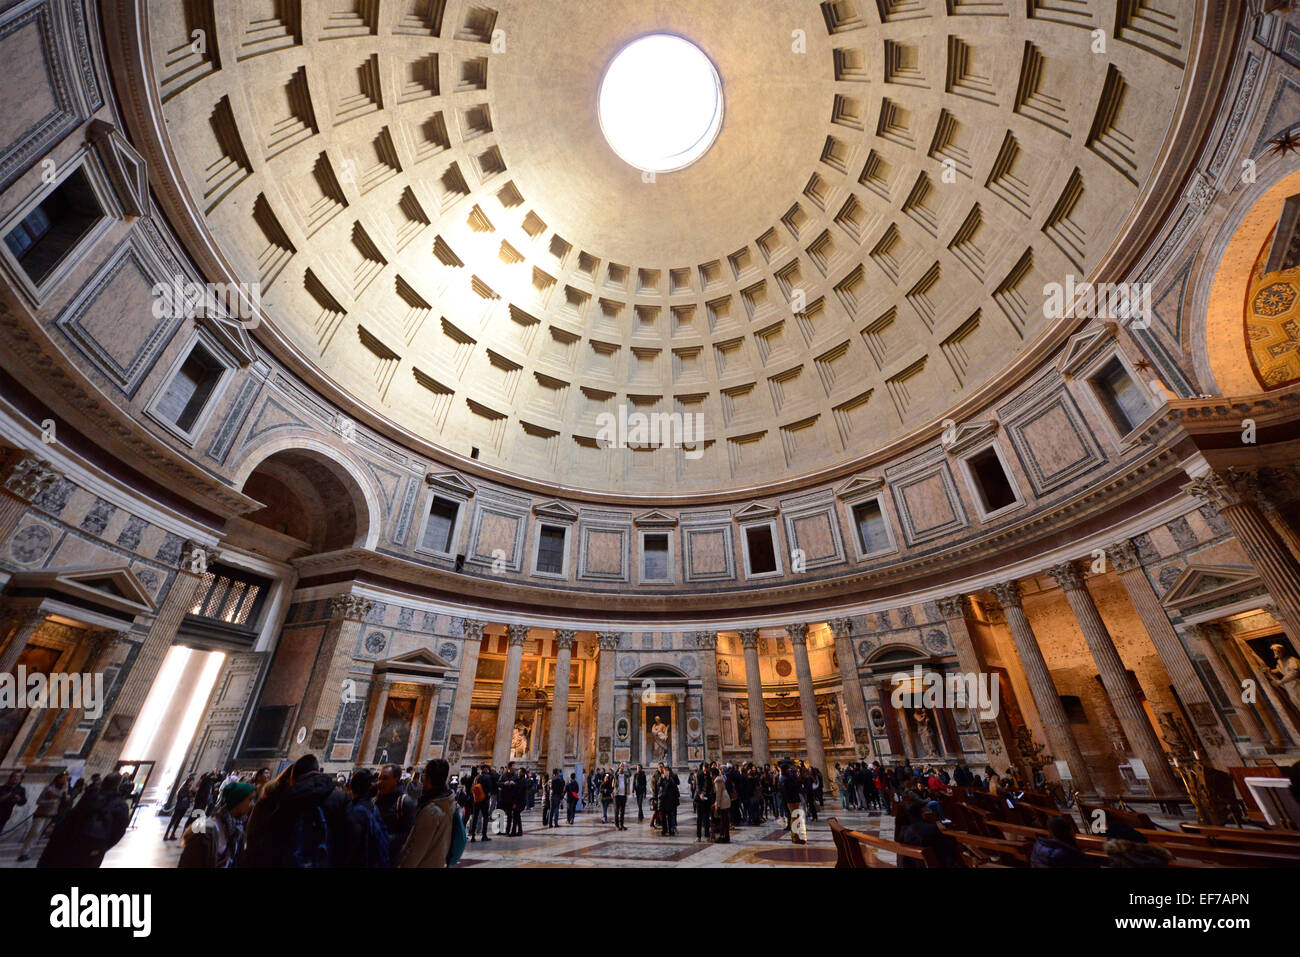 Inside the Pantheon Rome Italy Stock Photo